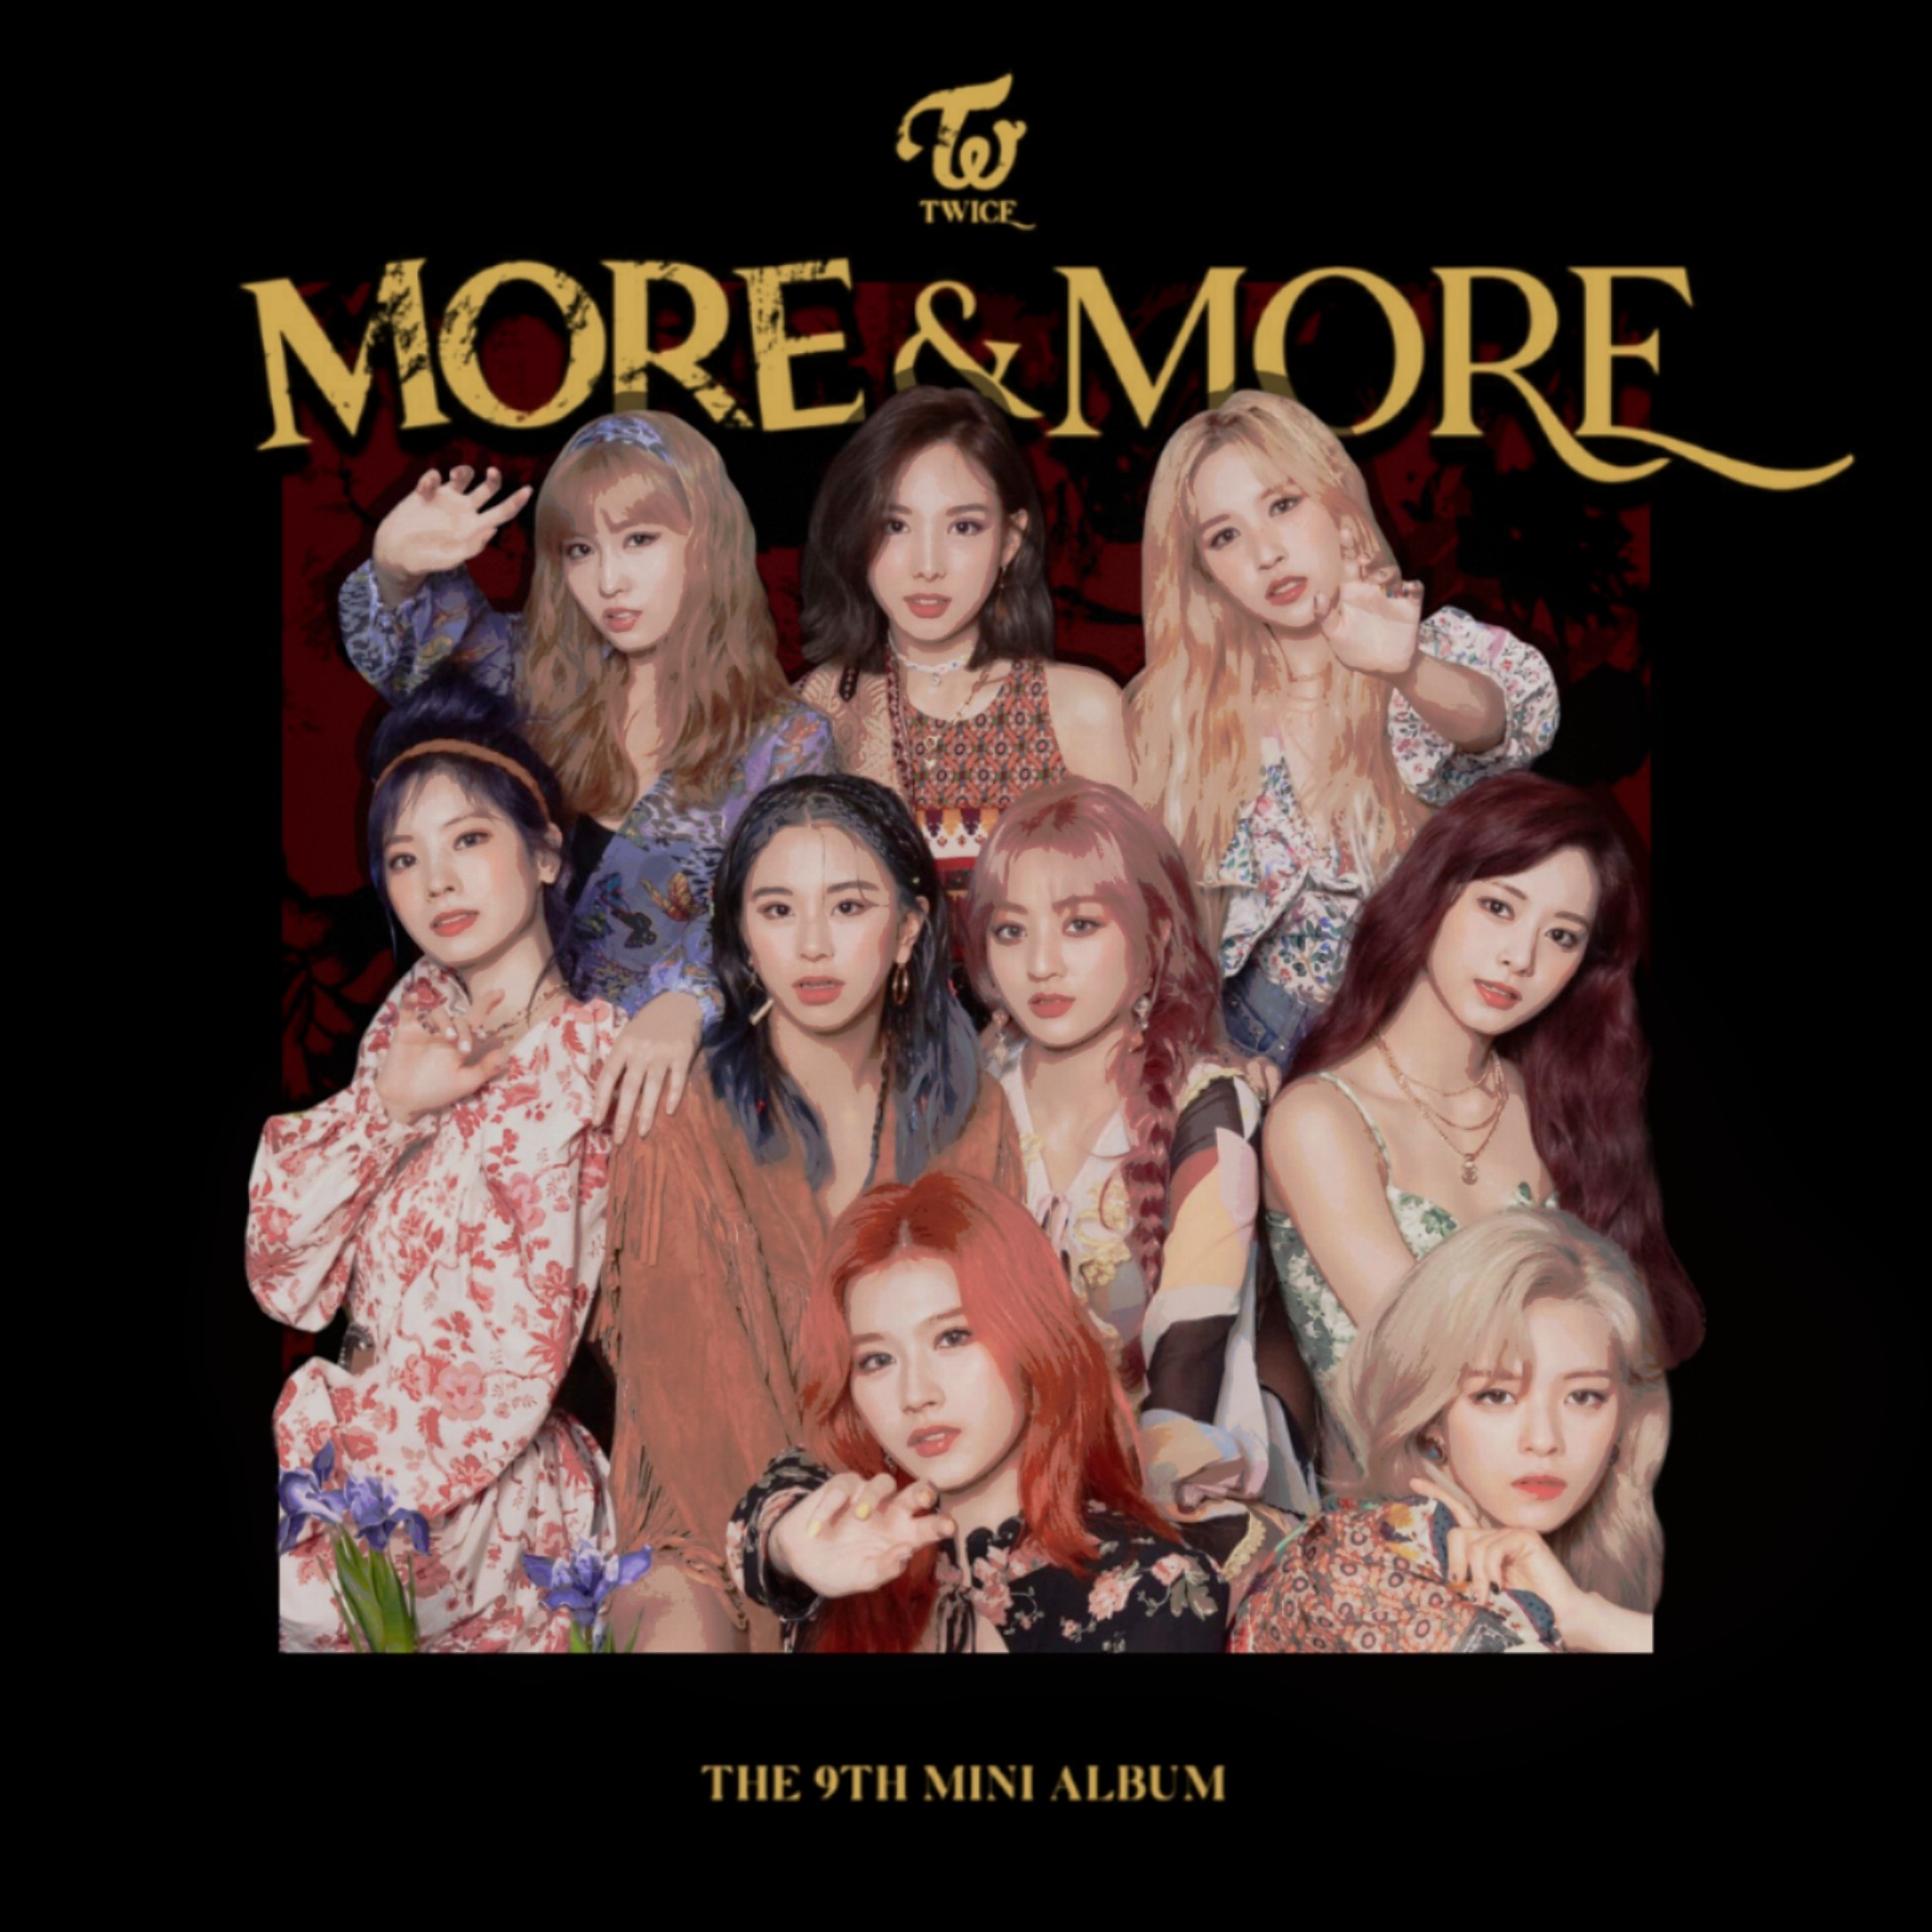 TWICE MORE AND MORE / THE 9TH MINI ALBUM cover by LEAlbum on DeviantArt